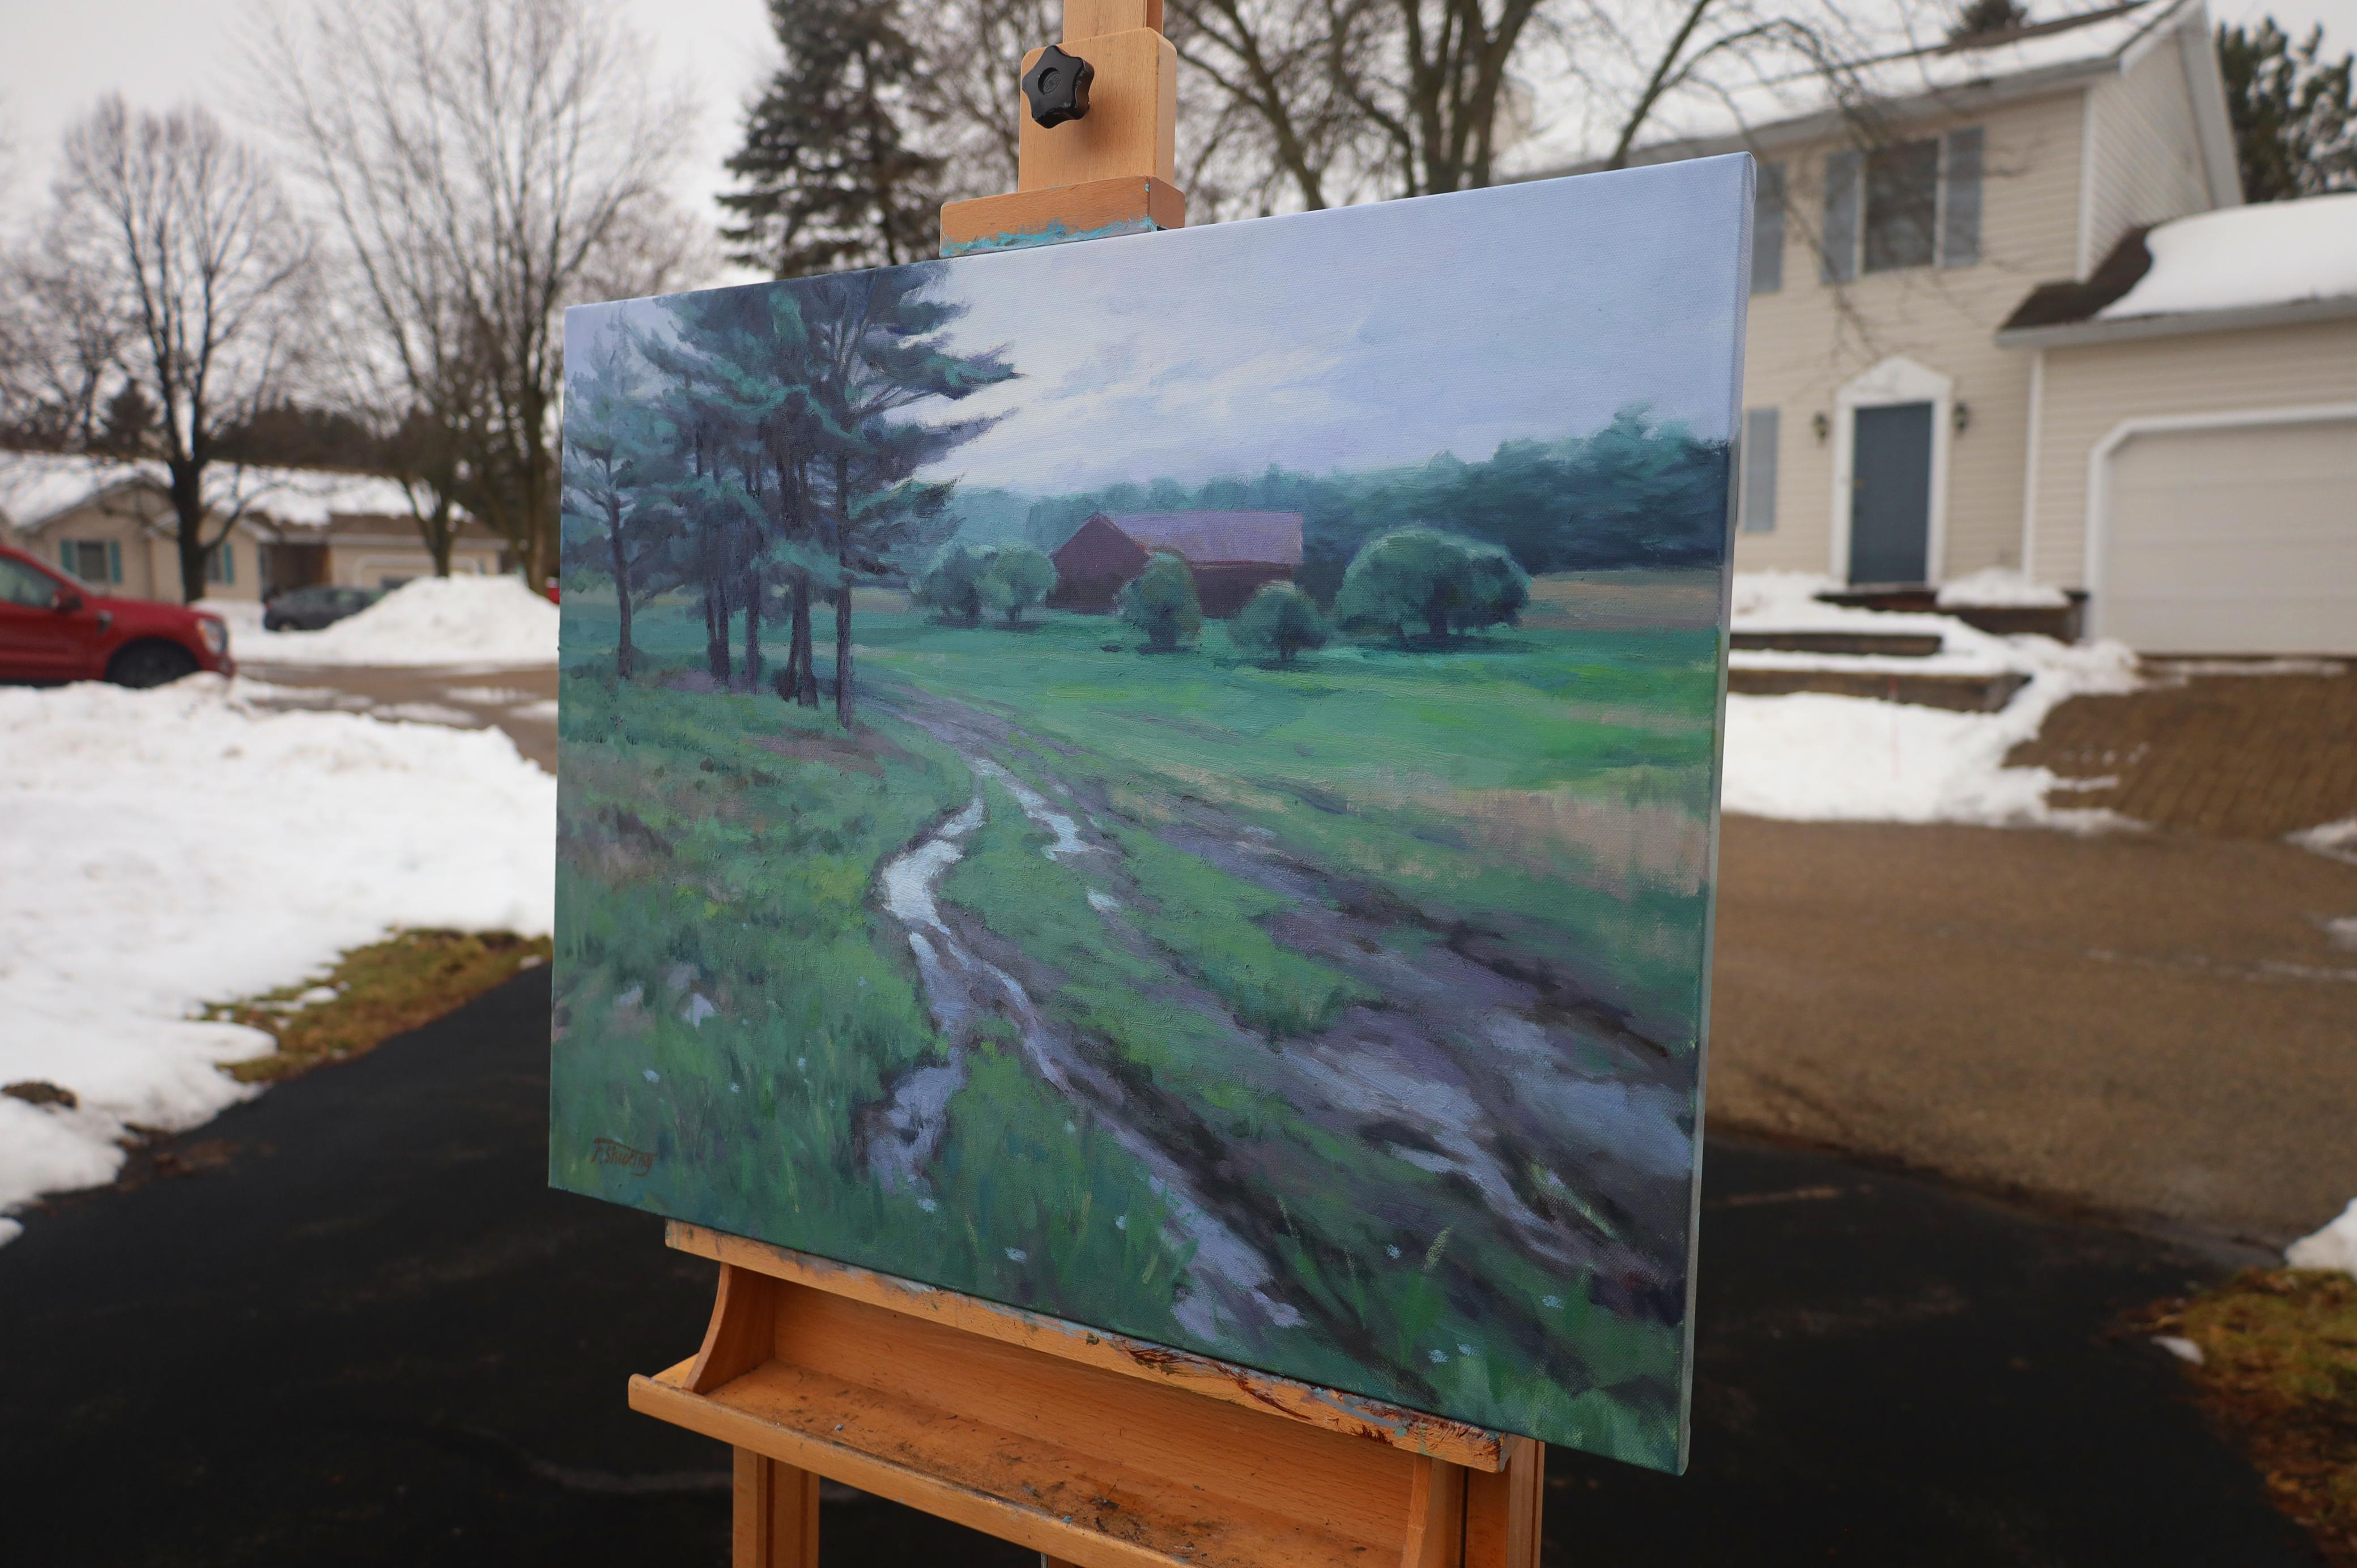 <p>Artist Comments<br>A muddy road cuts through a farm, winding across a grass-covered ground. The cloudy sky reflects on the puddle in the foreground, while a red house in the distance creates a subtle point of color amidst the greens. The soft